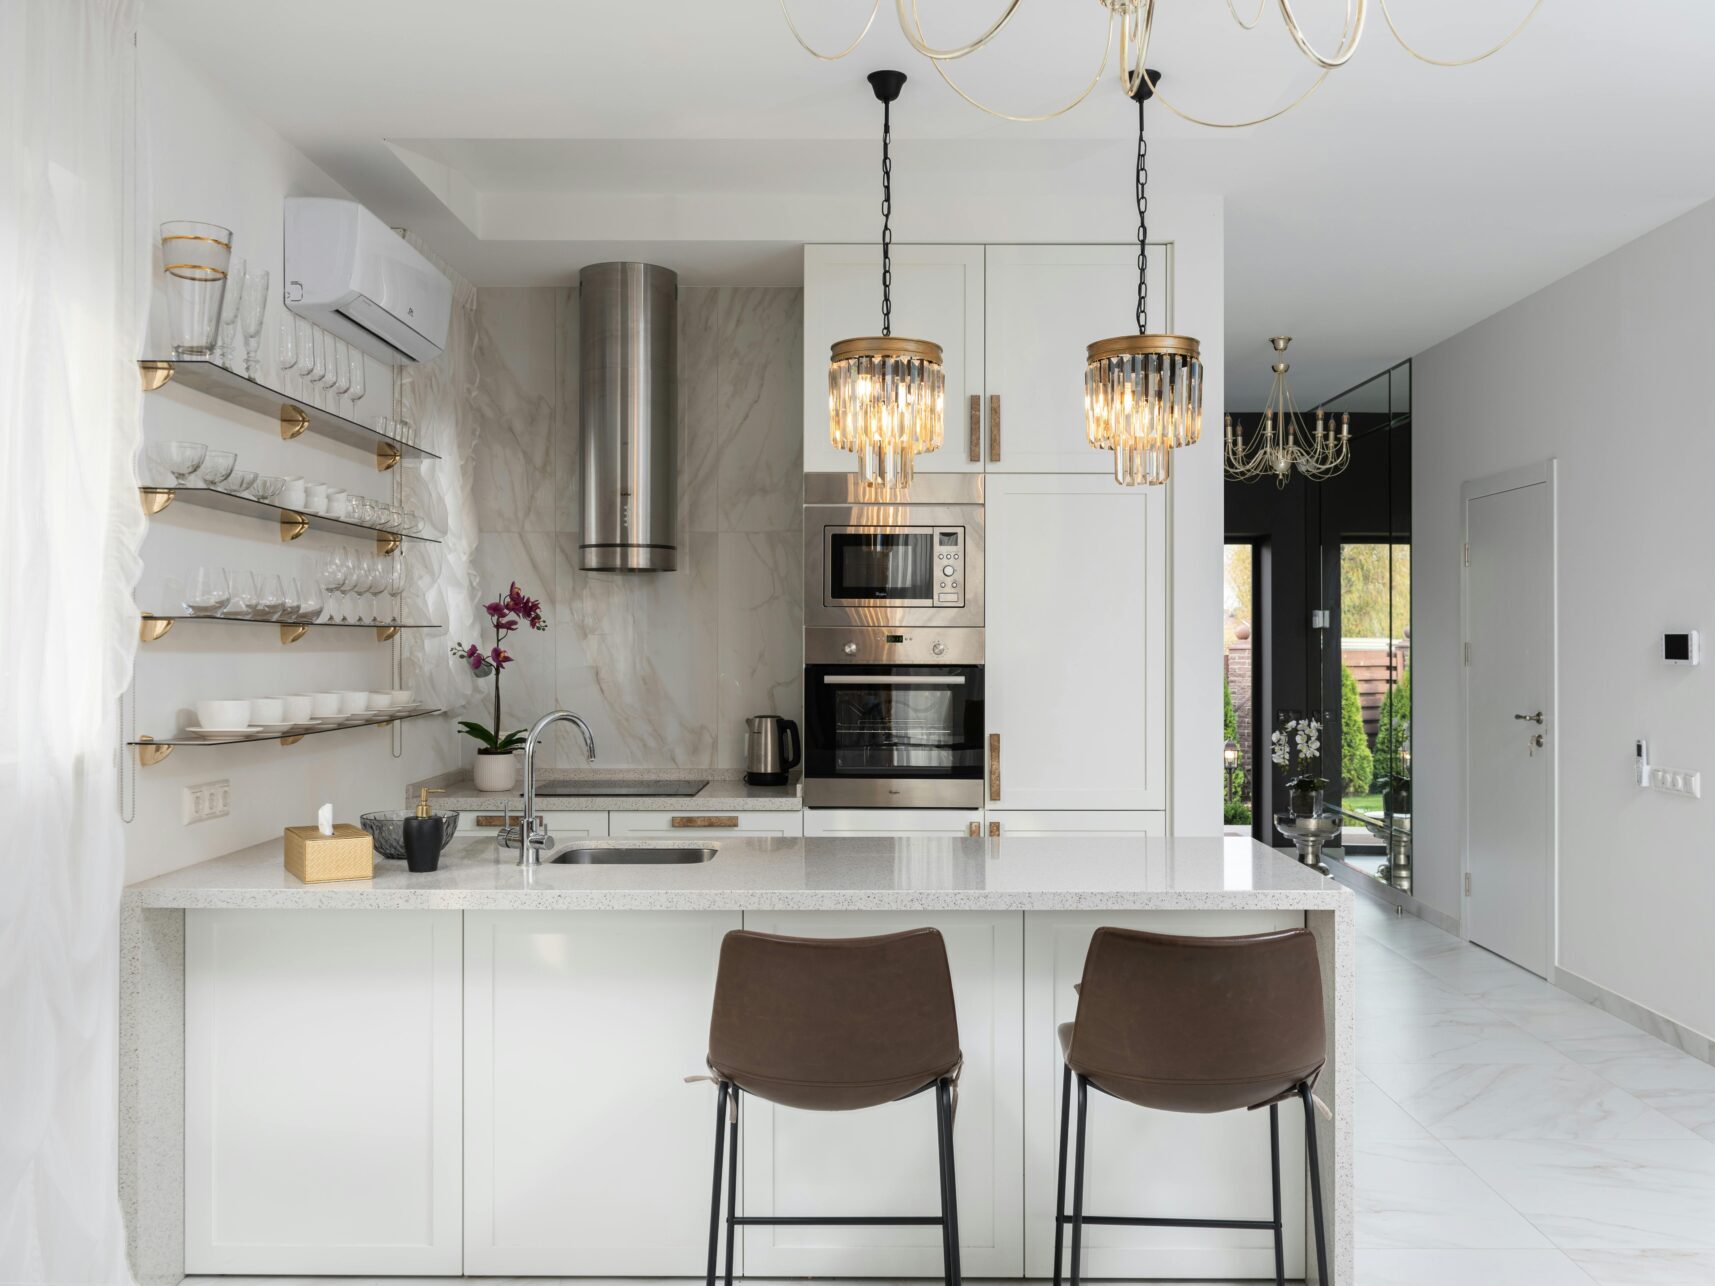 interior of luxury kitchen with marble and chandeliers